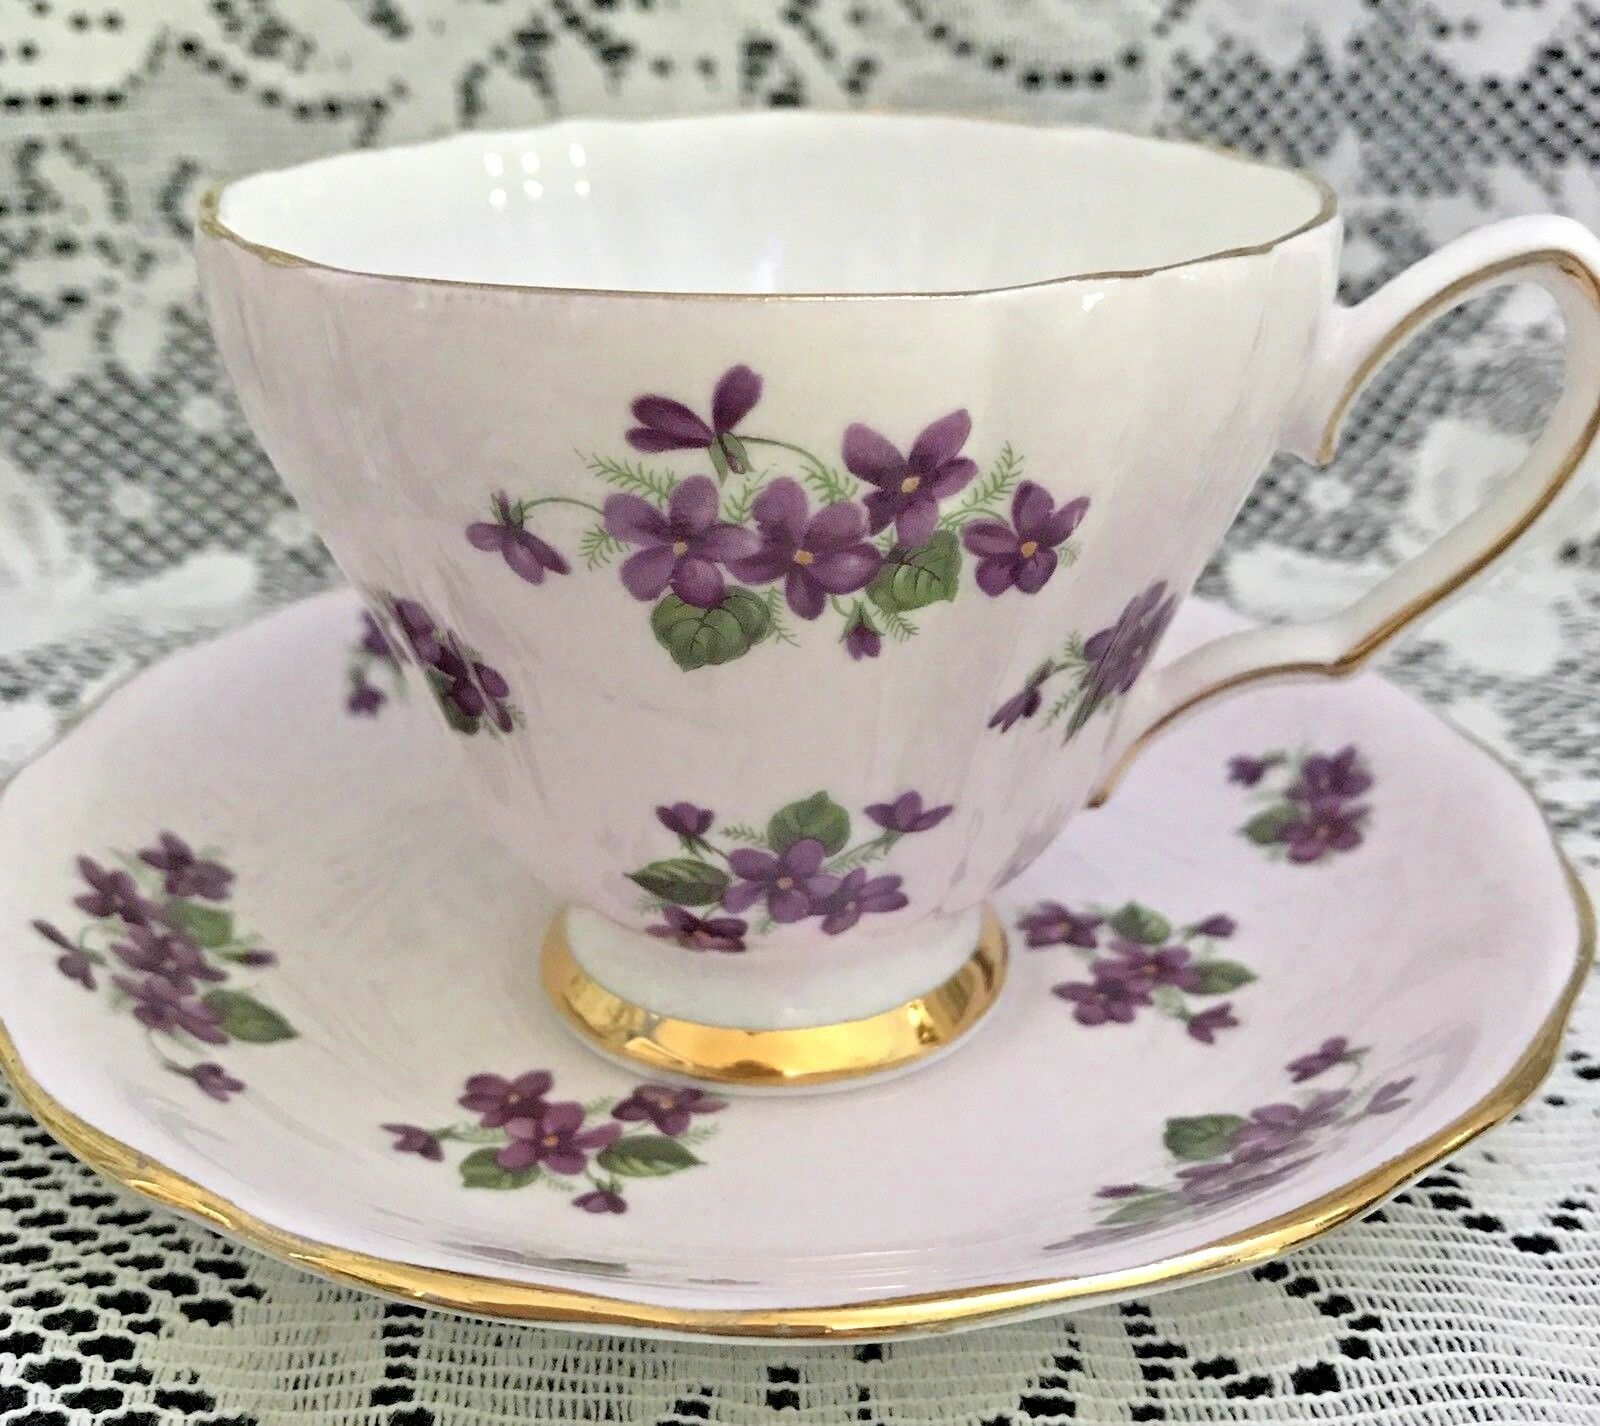 Colclough Teacup & Saucer, Purple Violets On Pale Pink China, Made In England